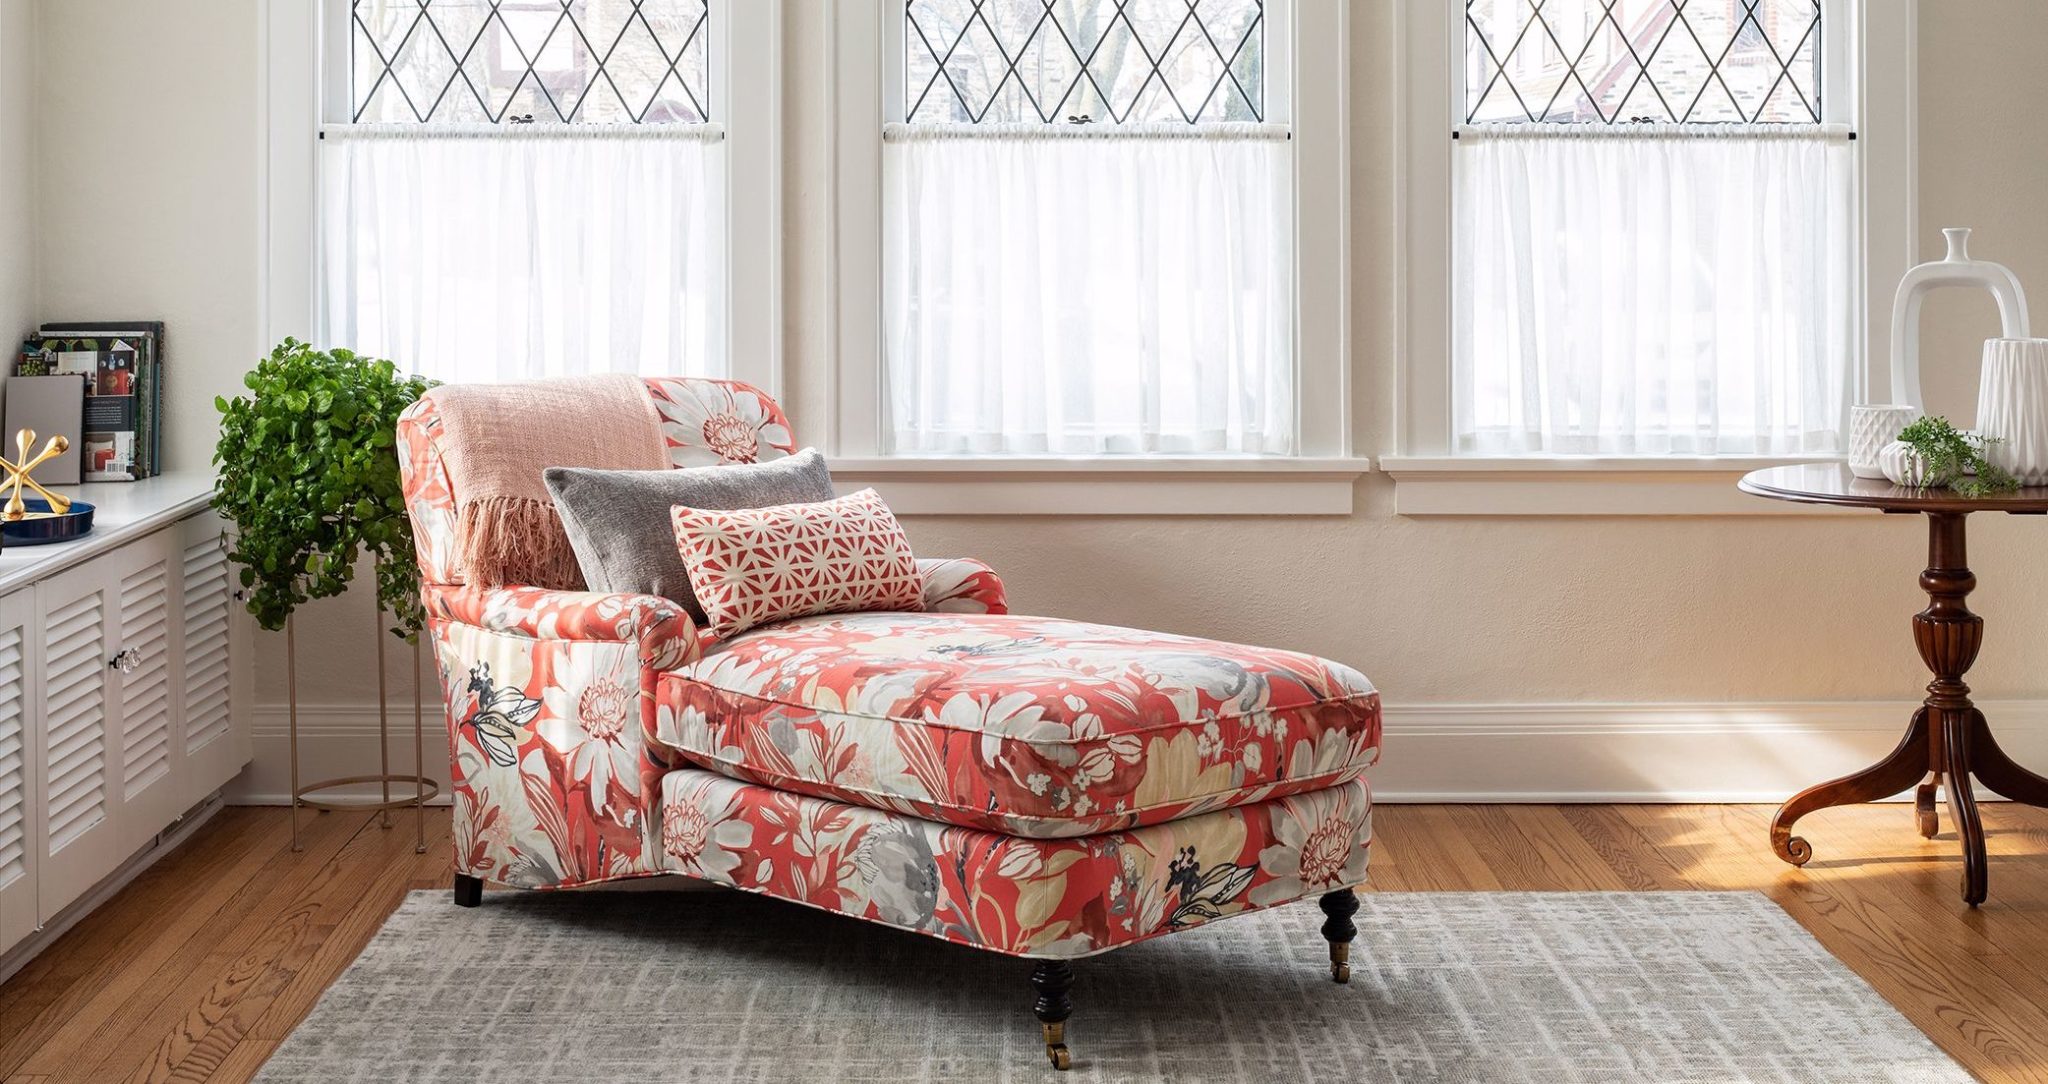 Add Whimsy To Your Space with a Chaise Lounge!